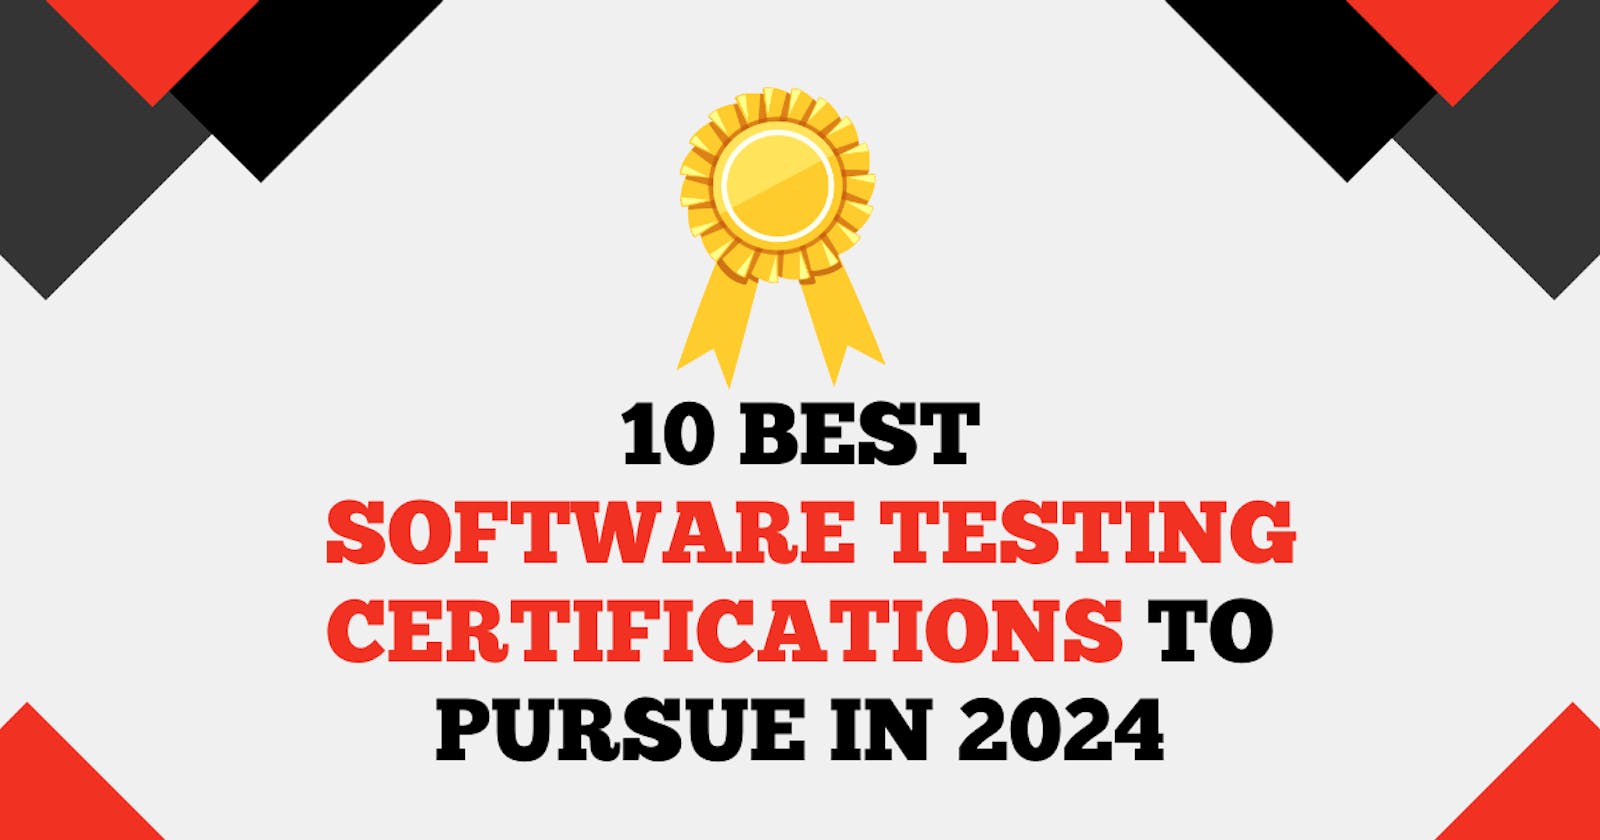 10 Best Software Testing Certifications To Pursue In 2024